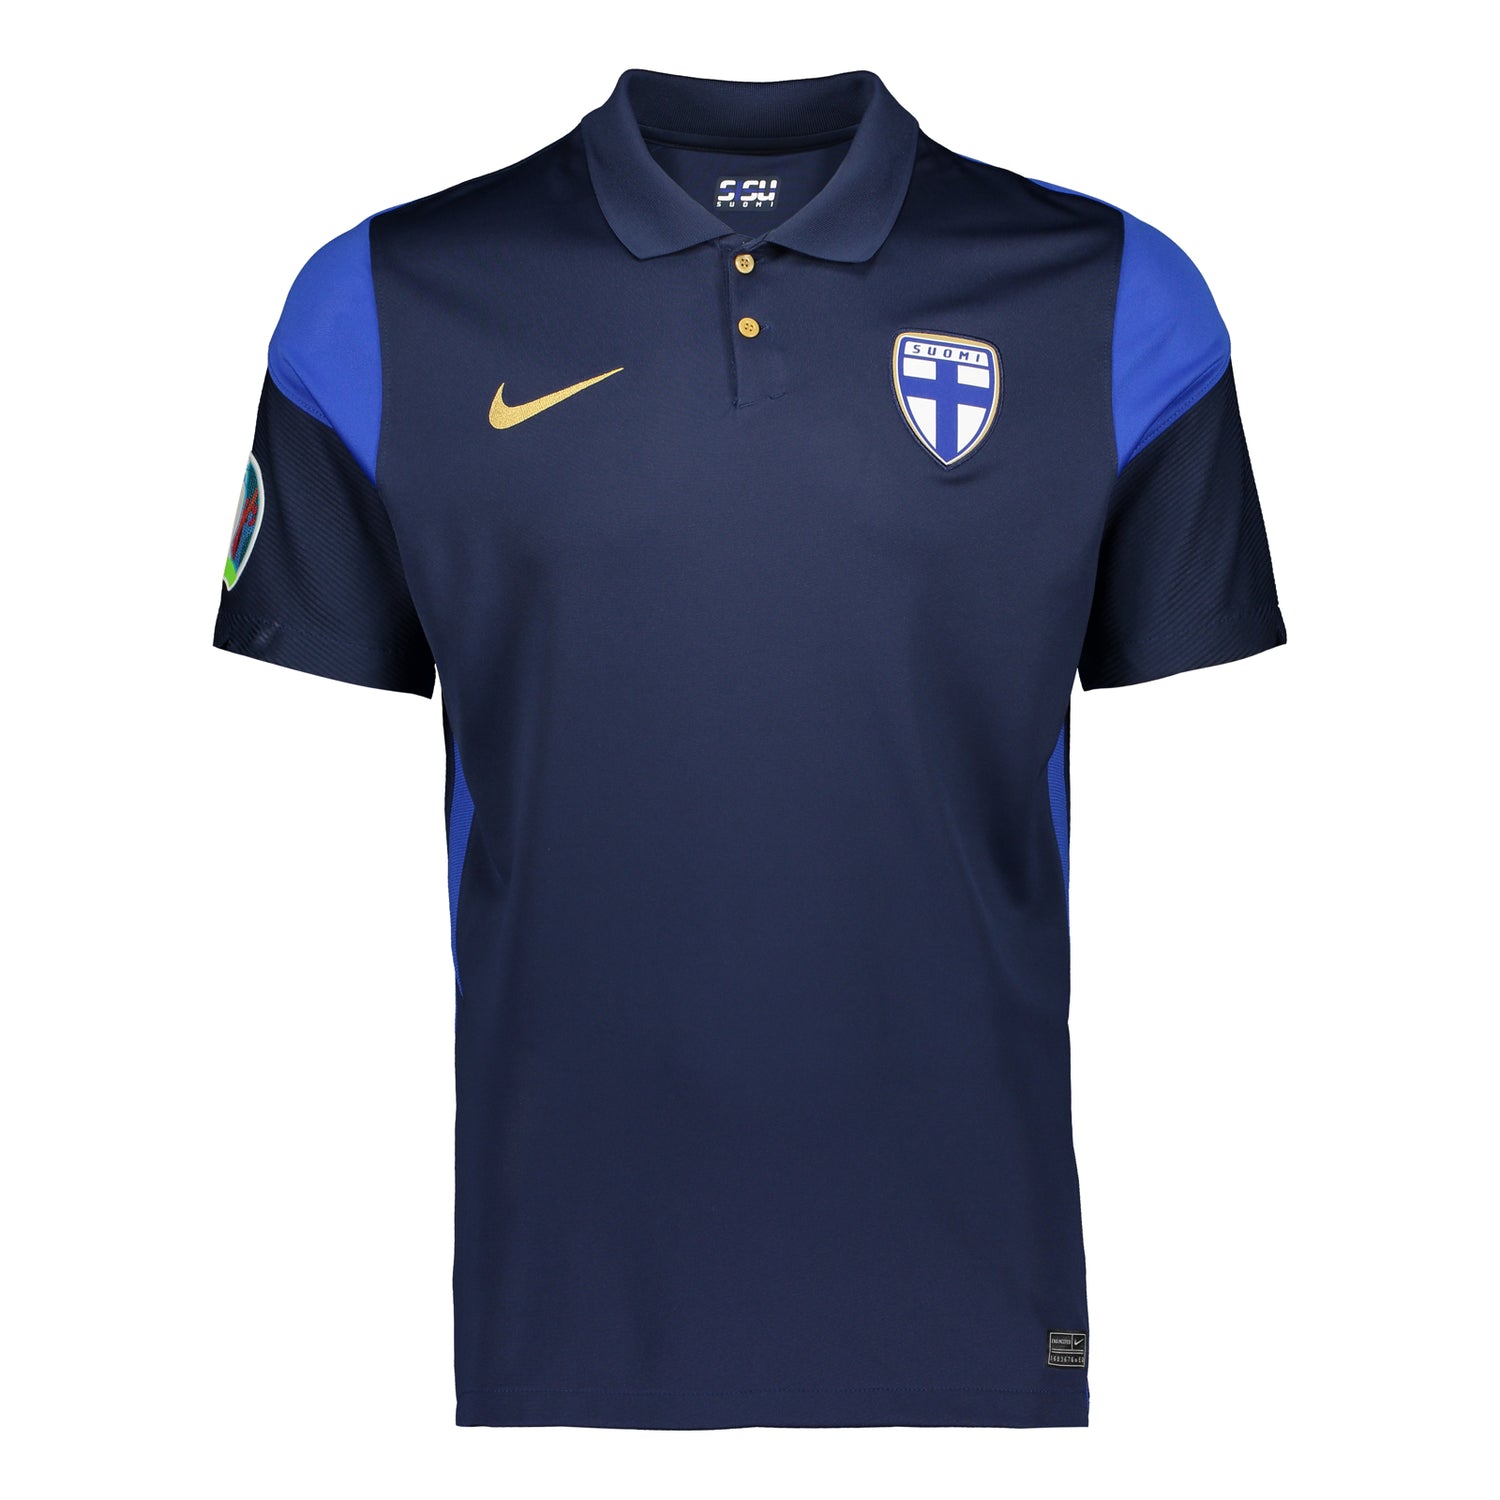 Finland Official Away Jersey EURO2020 Limited Edition Uronen Print